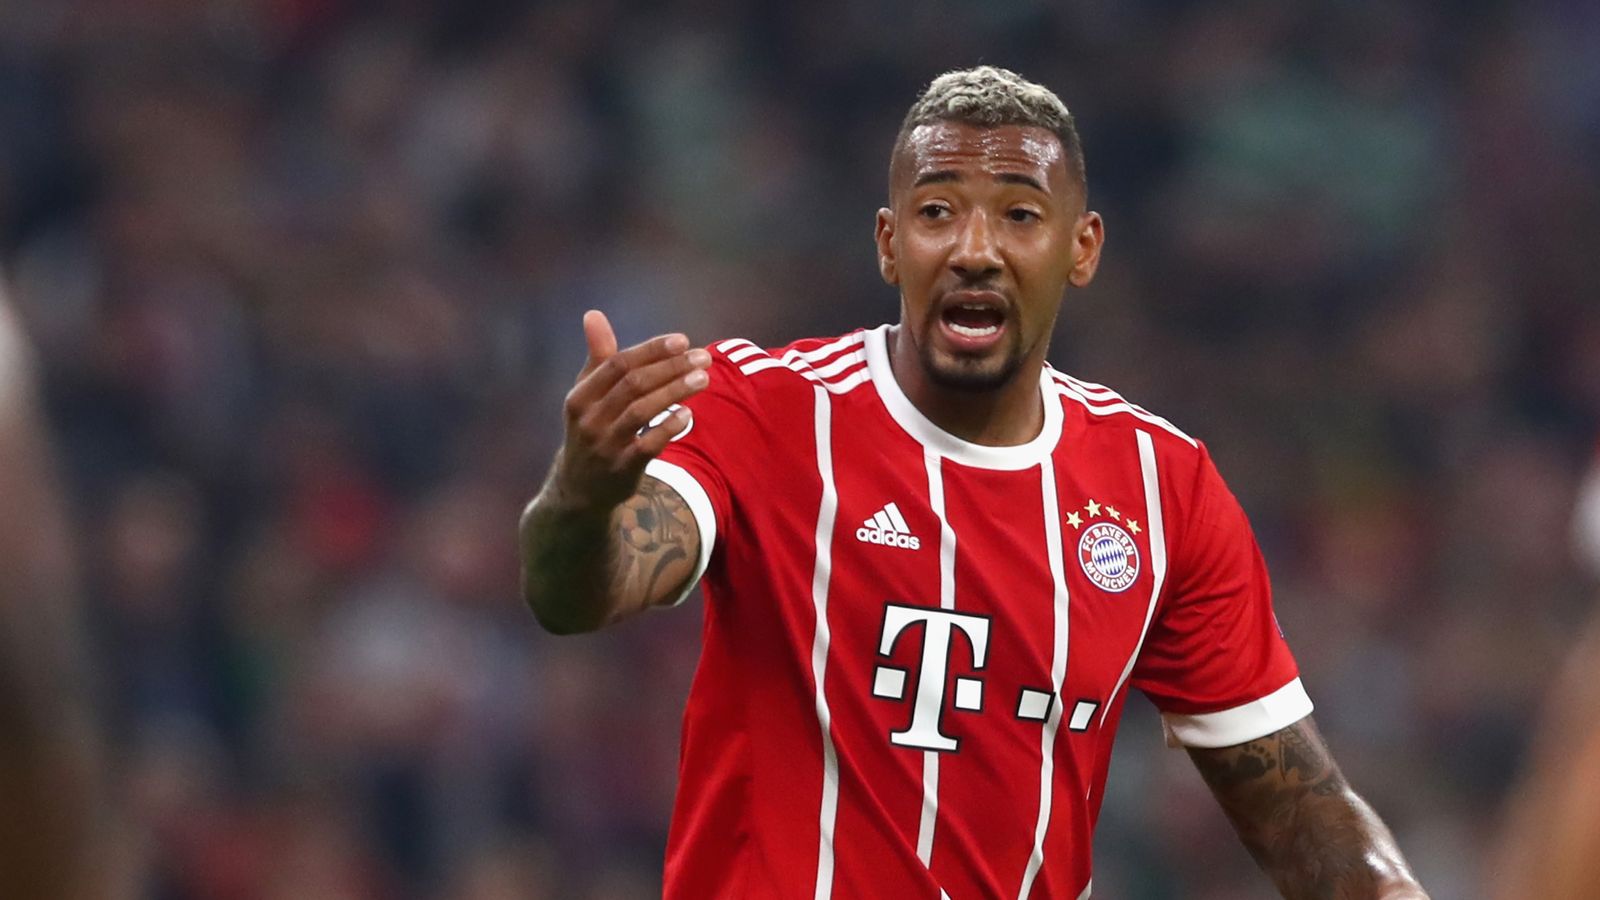 Manchester United transfer rumours: Jerome Boateng linked | Football News | Sky Sports